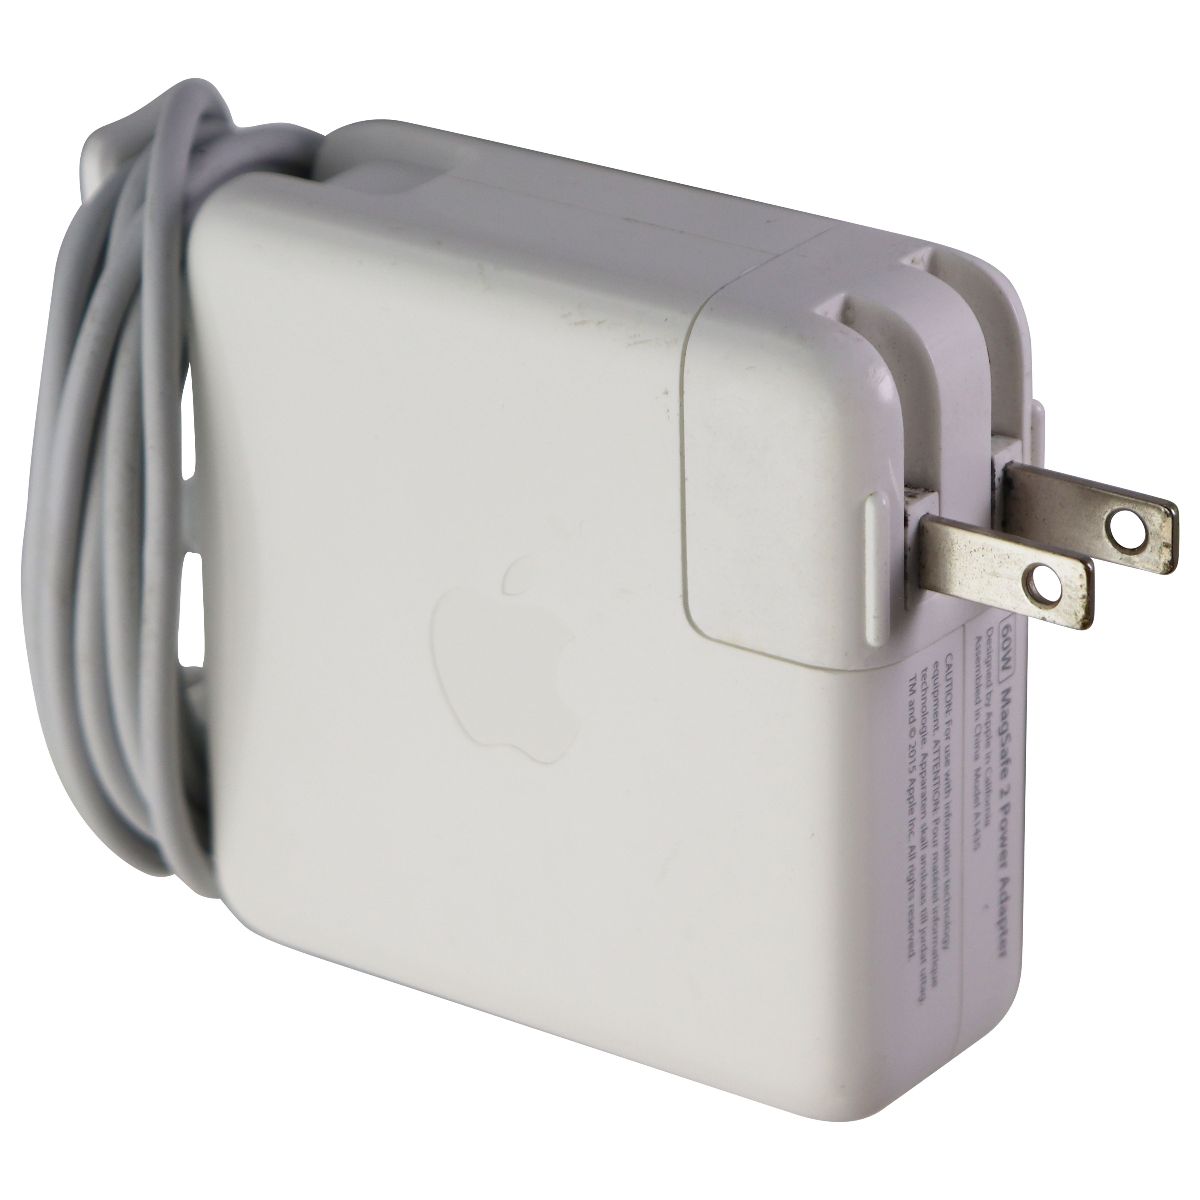 Apple (60-Watt) MagSafe 2 Power Adapter - White (A1435) - Folding Plug Only Computer Accessories - Laptop Power Adapters/Chargers Apple    - Simple Cell Bulk Wholesale Pricing - USA Seller